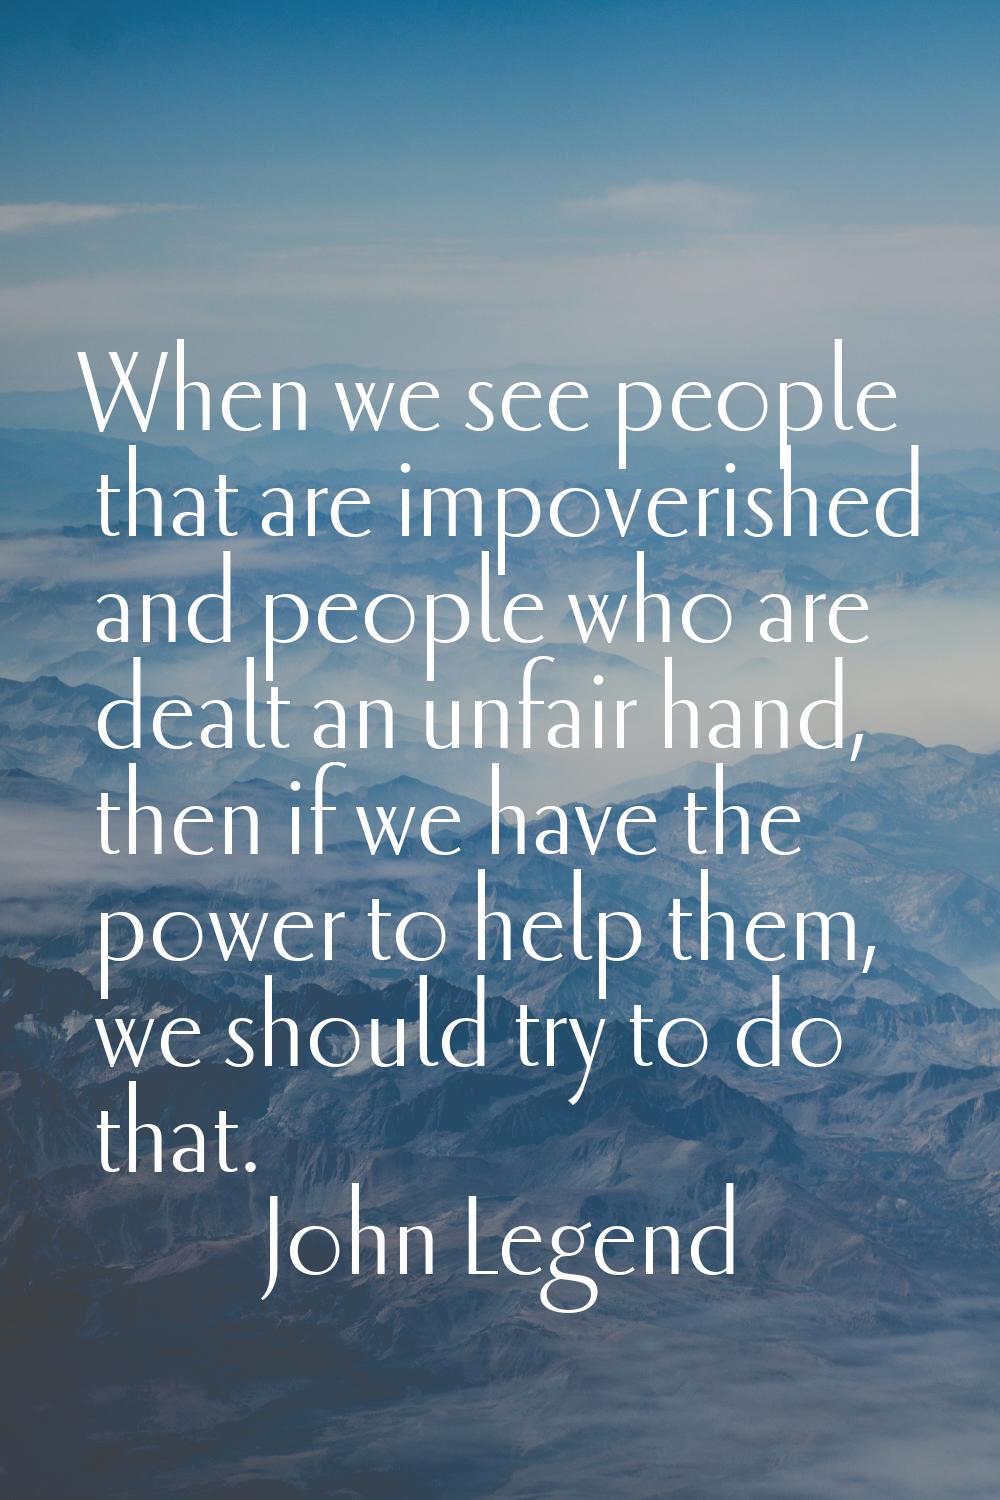 When we see people that are impoverished and people who are dealt an unfair hand, then if we have t